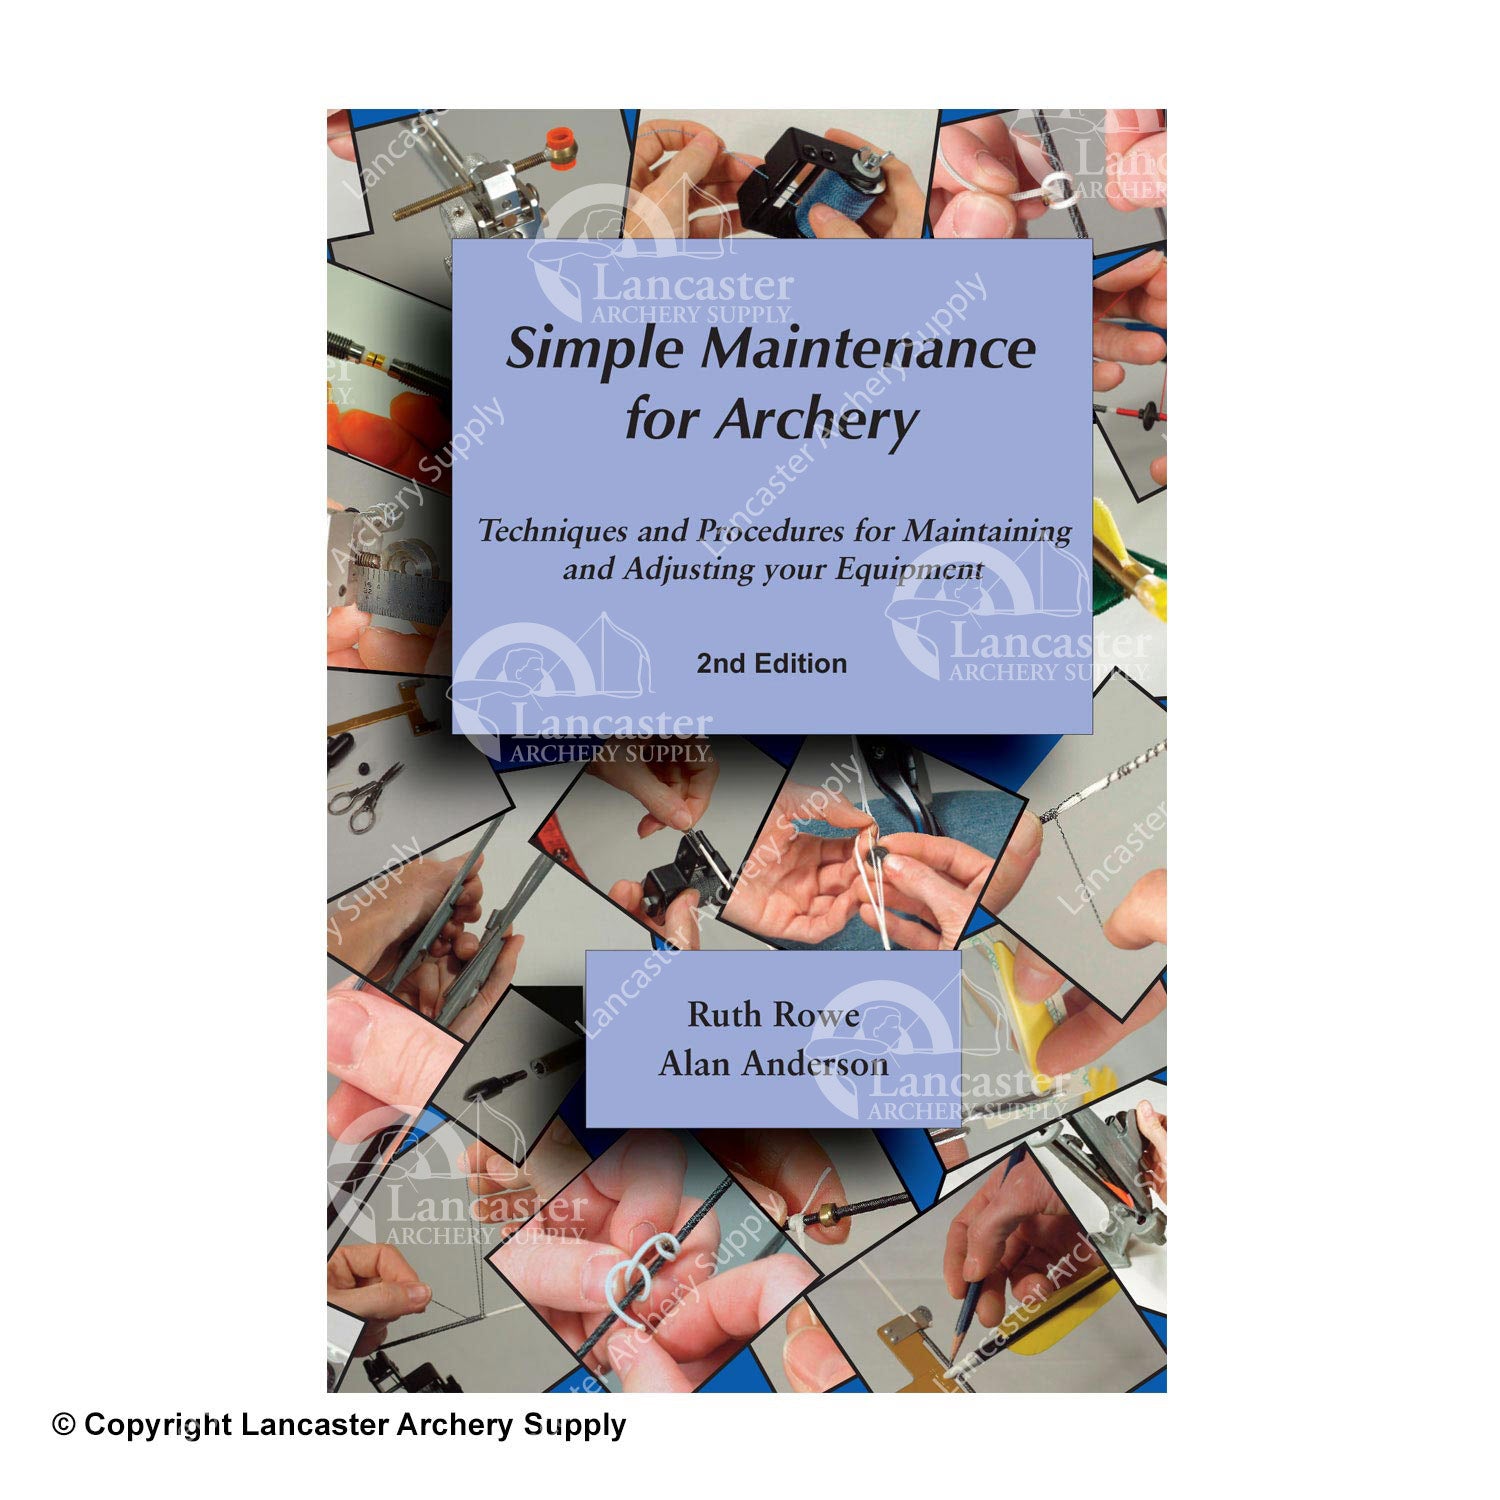 Ruth Rowe 2nd Edition Simple Maintenance for Archery